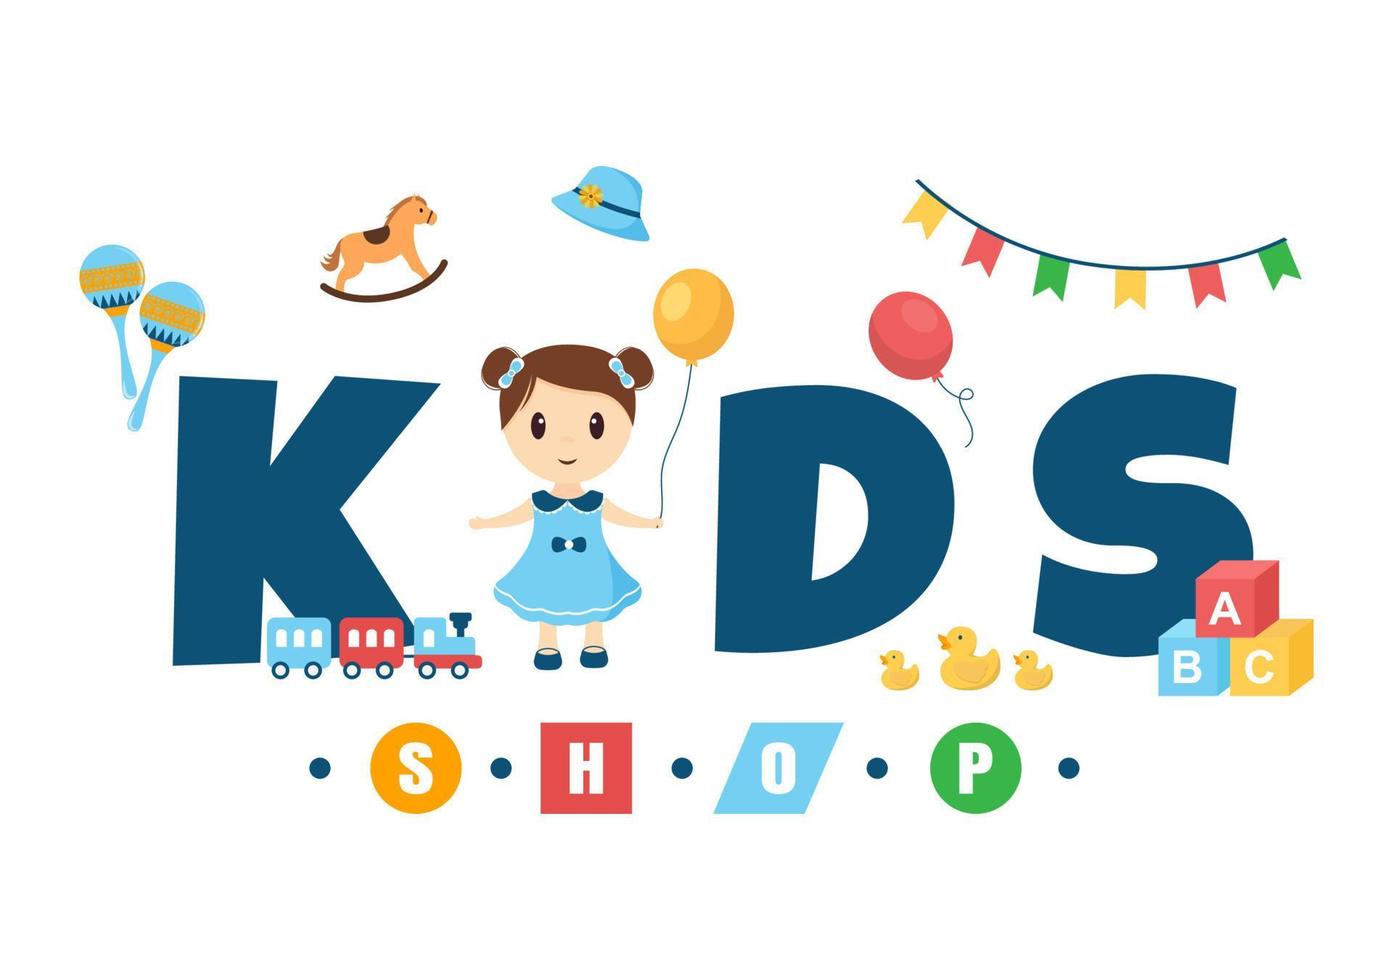 Kids Shop Building Template Hand Drawn Cartoon Flat Style Illustration with Children Equipment such as Clothes or Toys for Shopping Concept vector